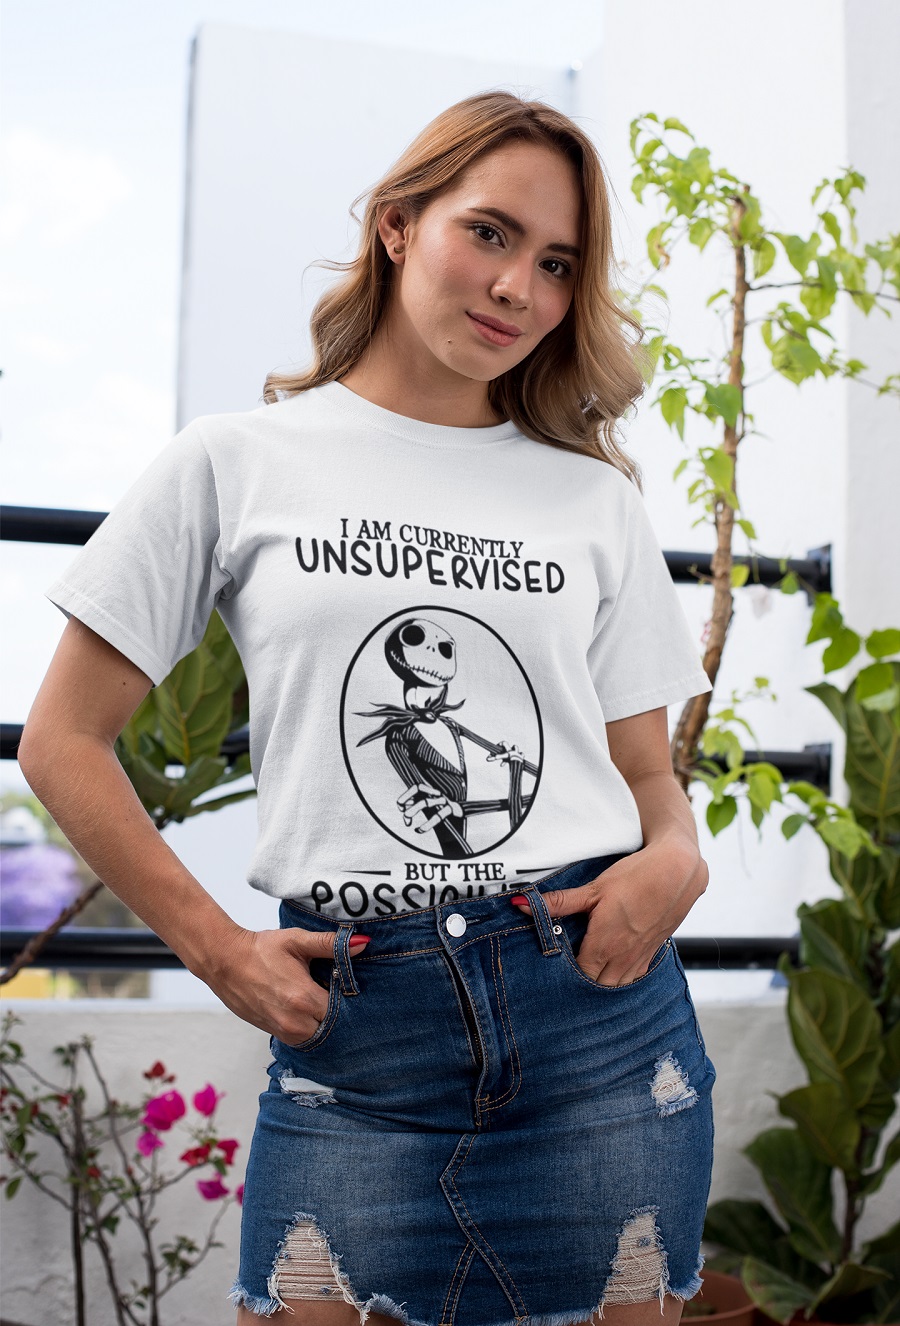 Jack skellington I am currently unsupervised but the possibilities are endless shirt